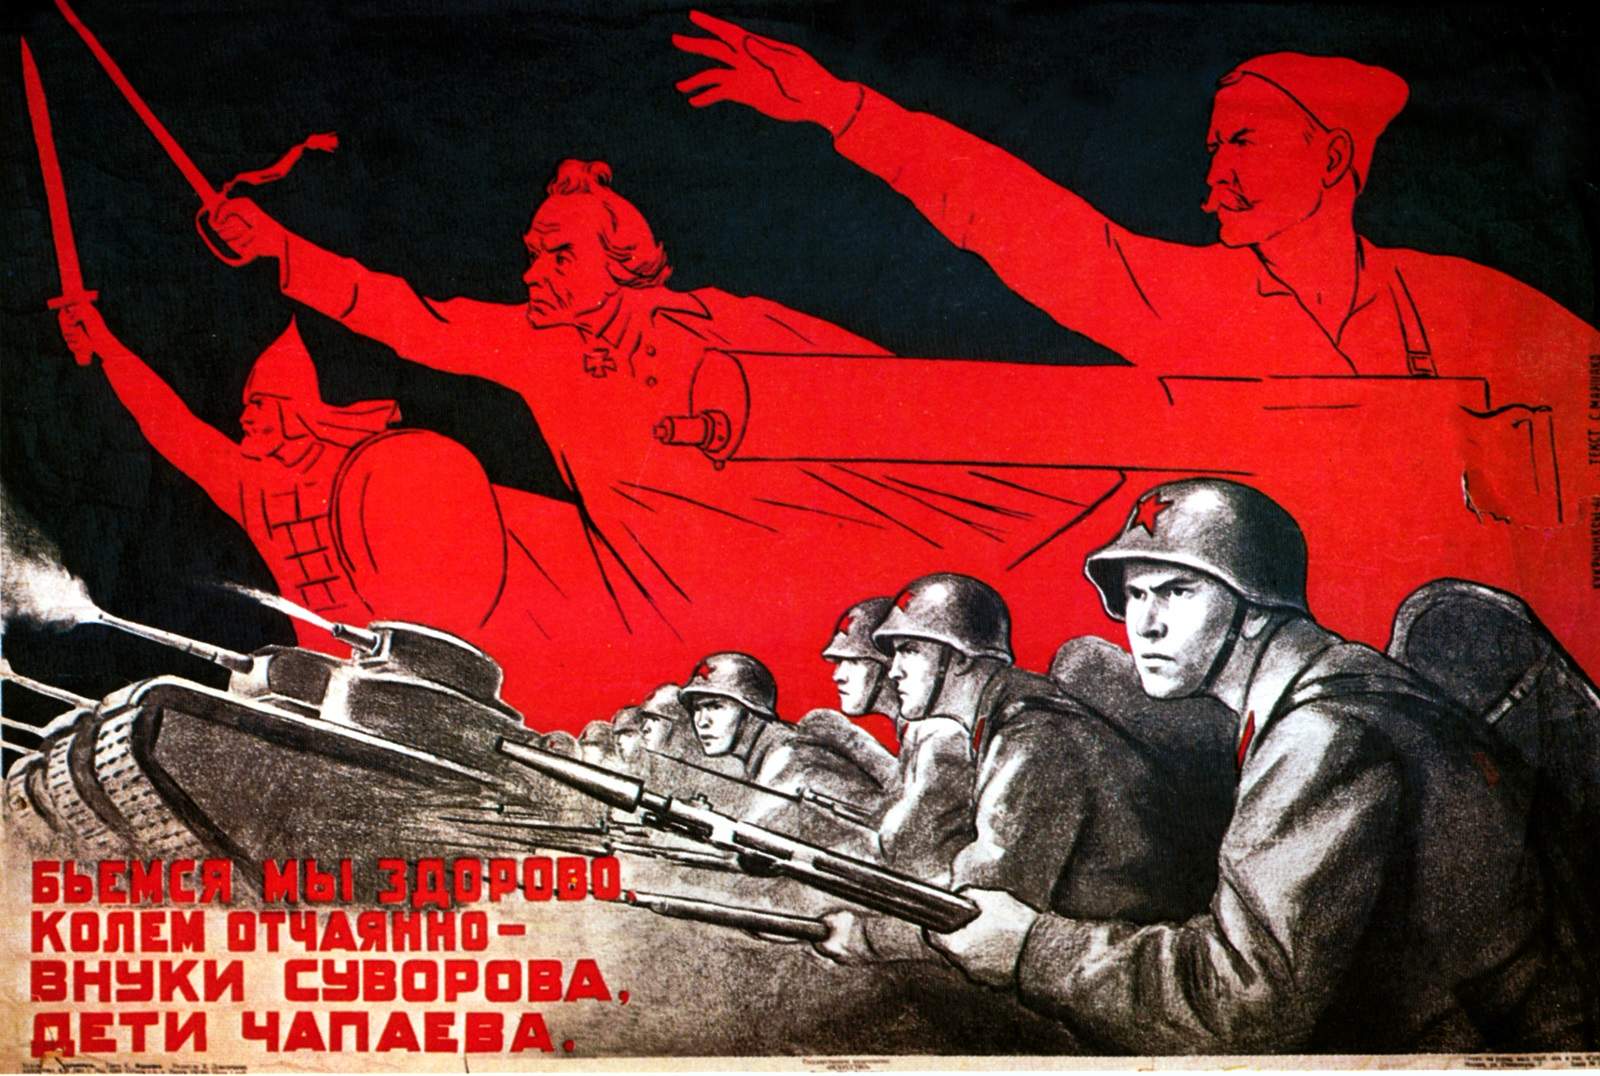 A Soviet poster from the Second World War exhorts soldiers to “Fight bravely, sons of Suvorov and Chapayev”, 1941 (Galerie Bilderwelt/Getty Images)